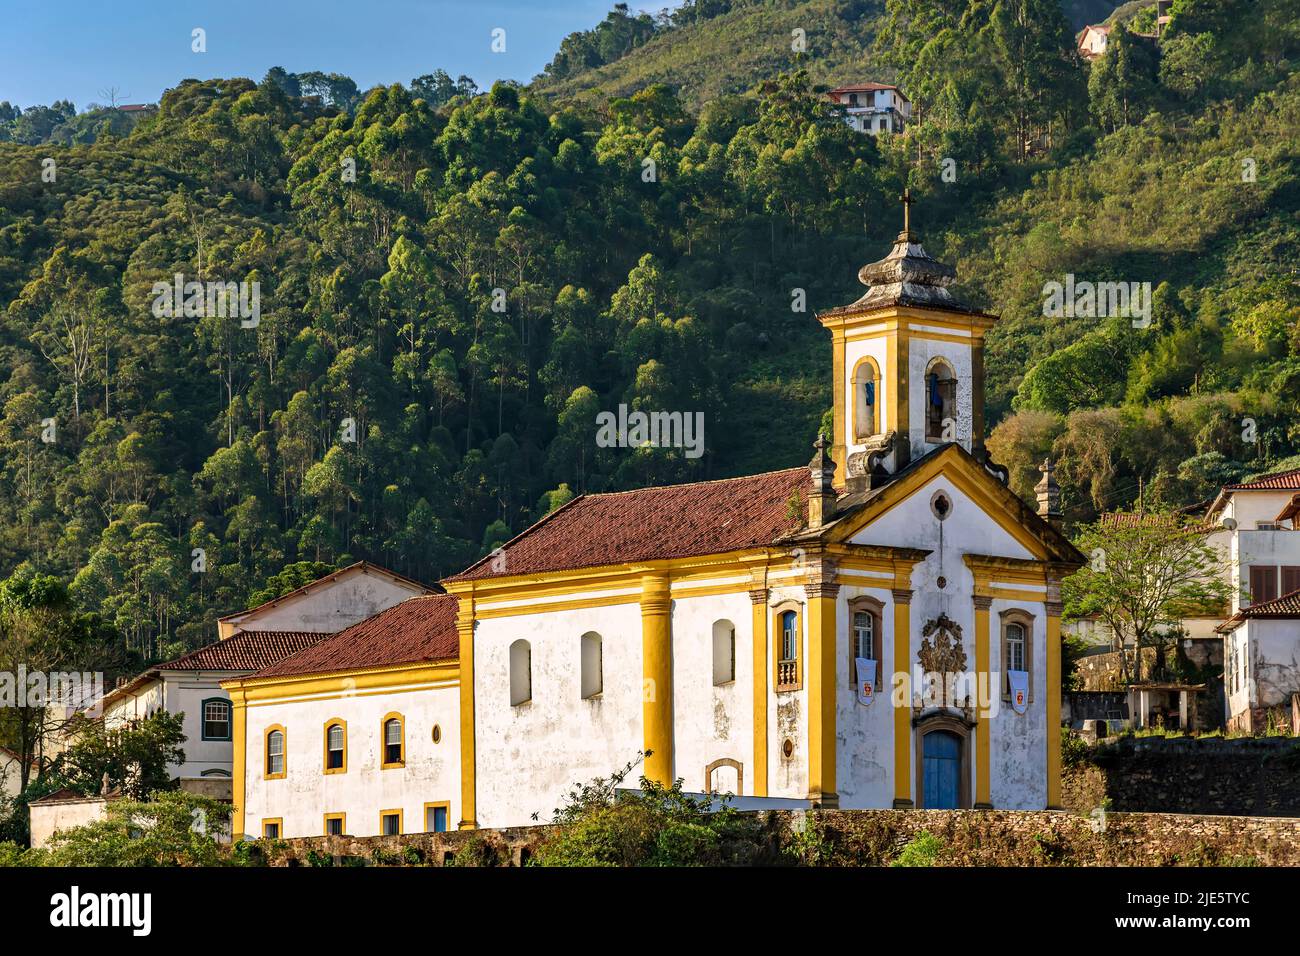 Facade of a historic baroque-style church in the city of Ouro Preto in Minas Gerais illuminated during the late afternoon with the hills and local veg Stock Photo